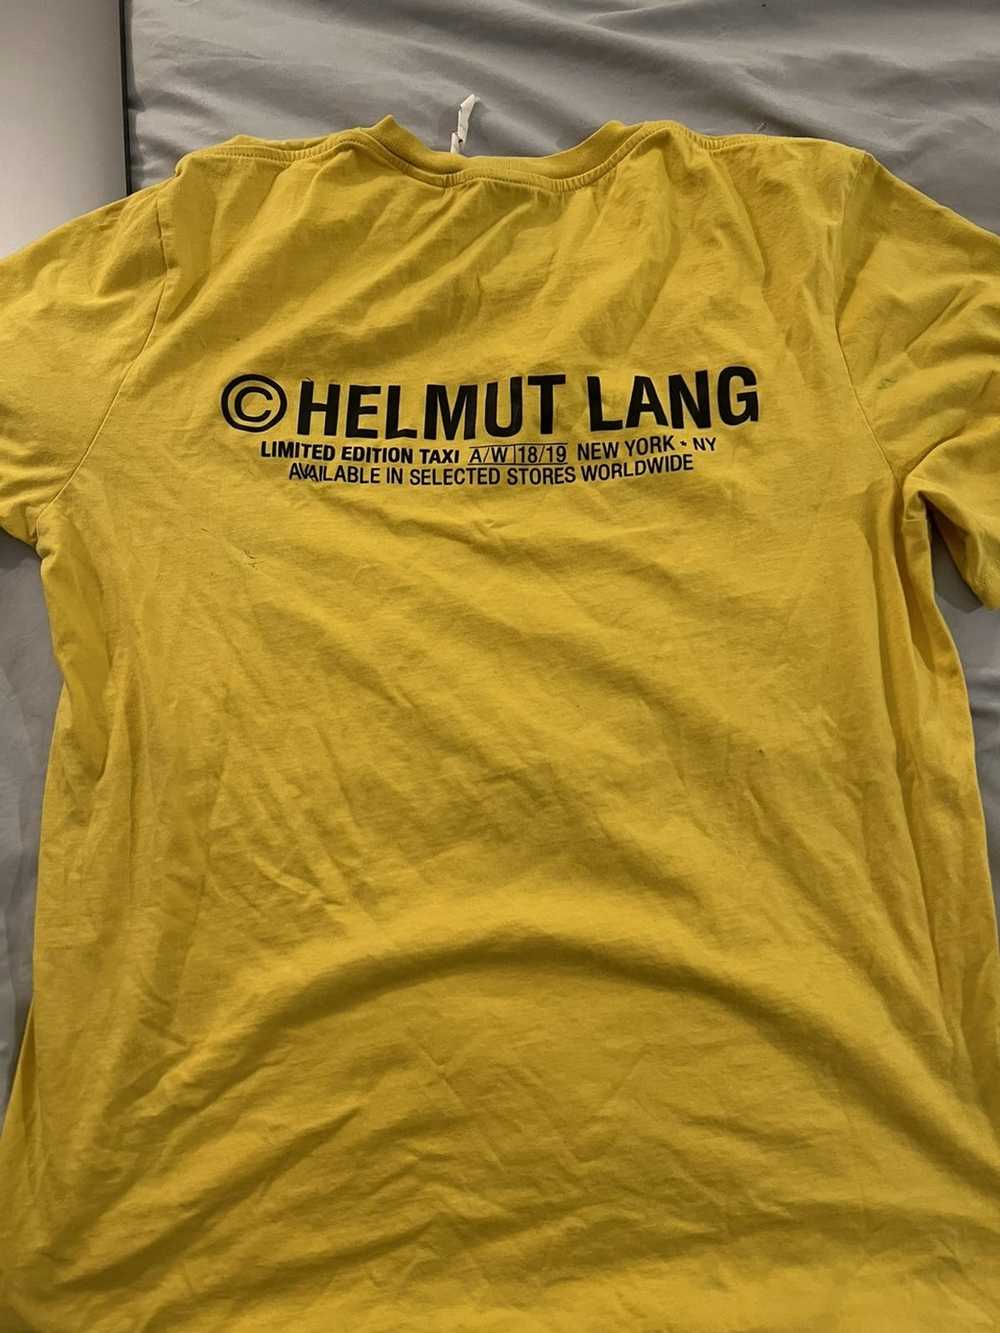 Helmut Lang Helmut Lang Yellow Taxi Tee - image 6